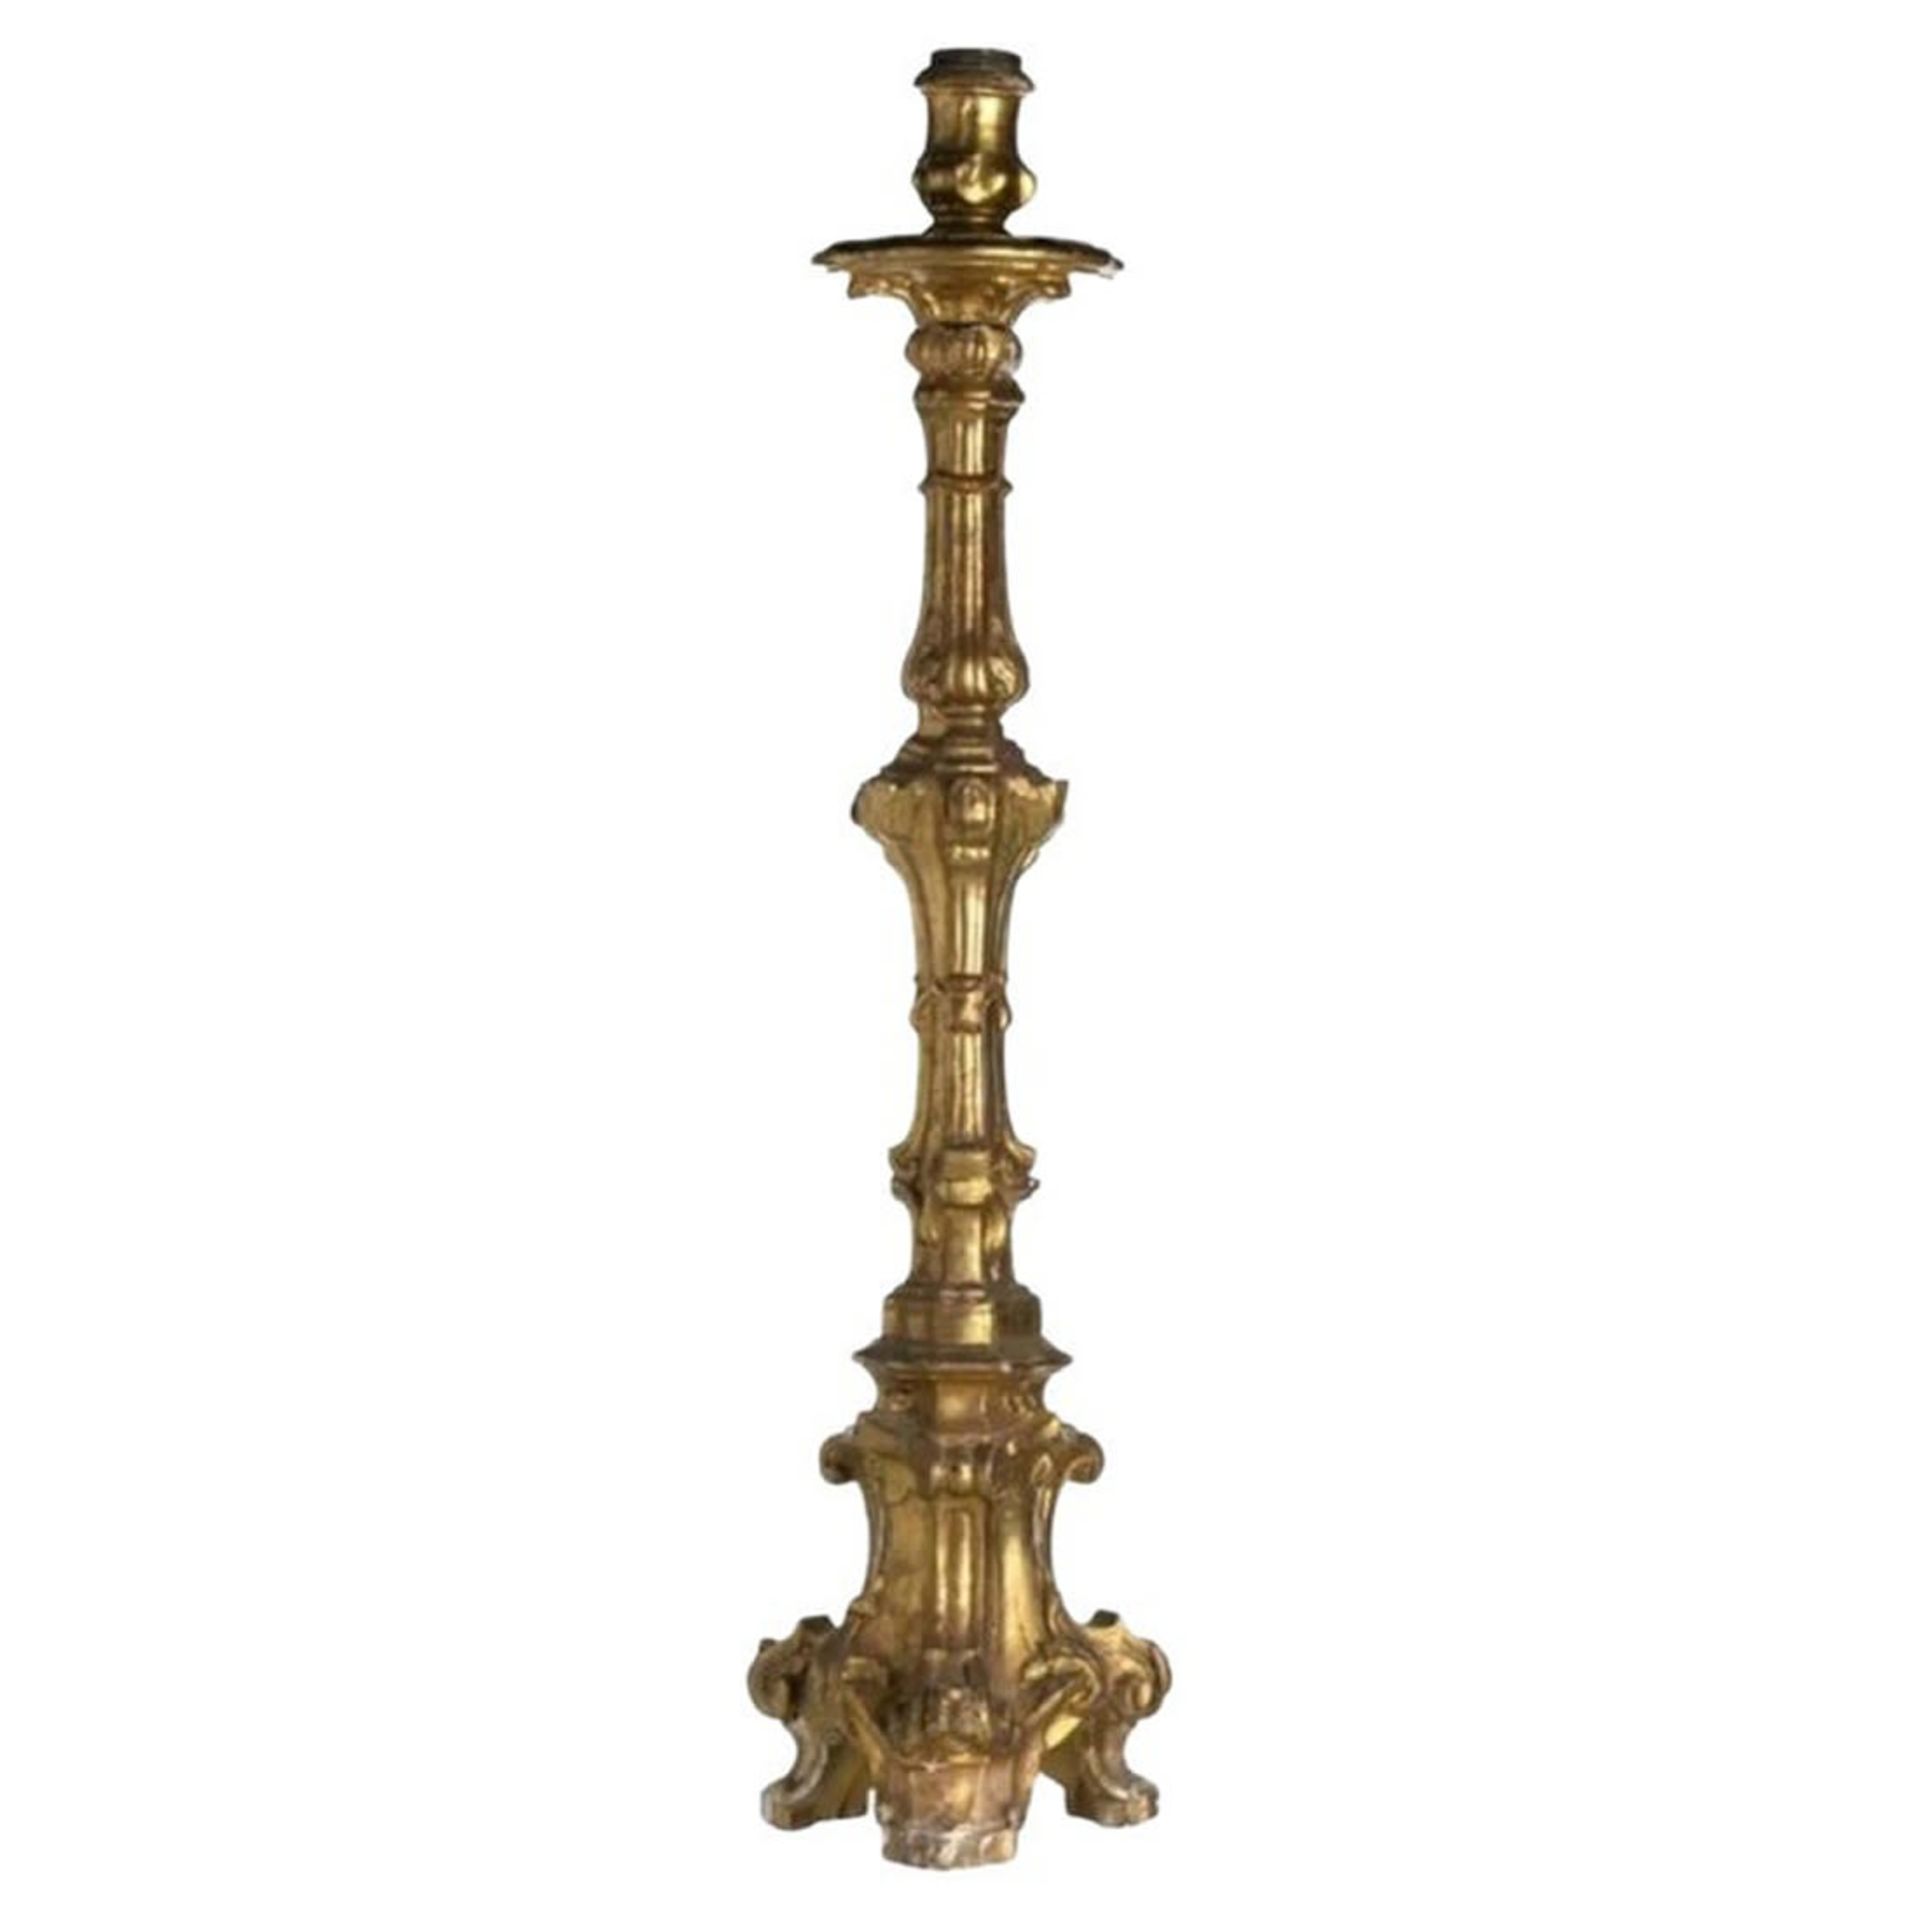 Italian torch holder in gilded wood, 18th century